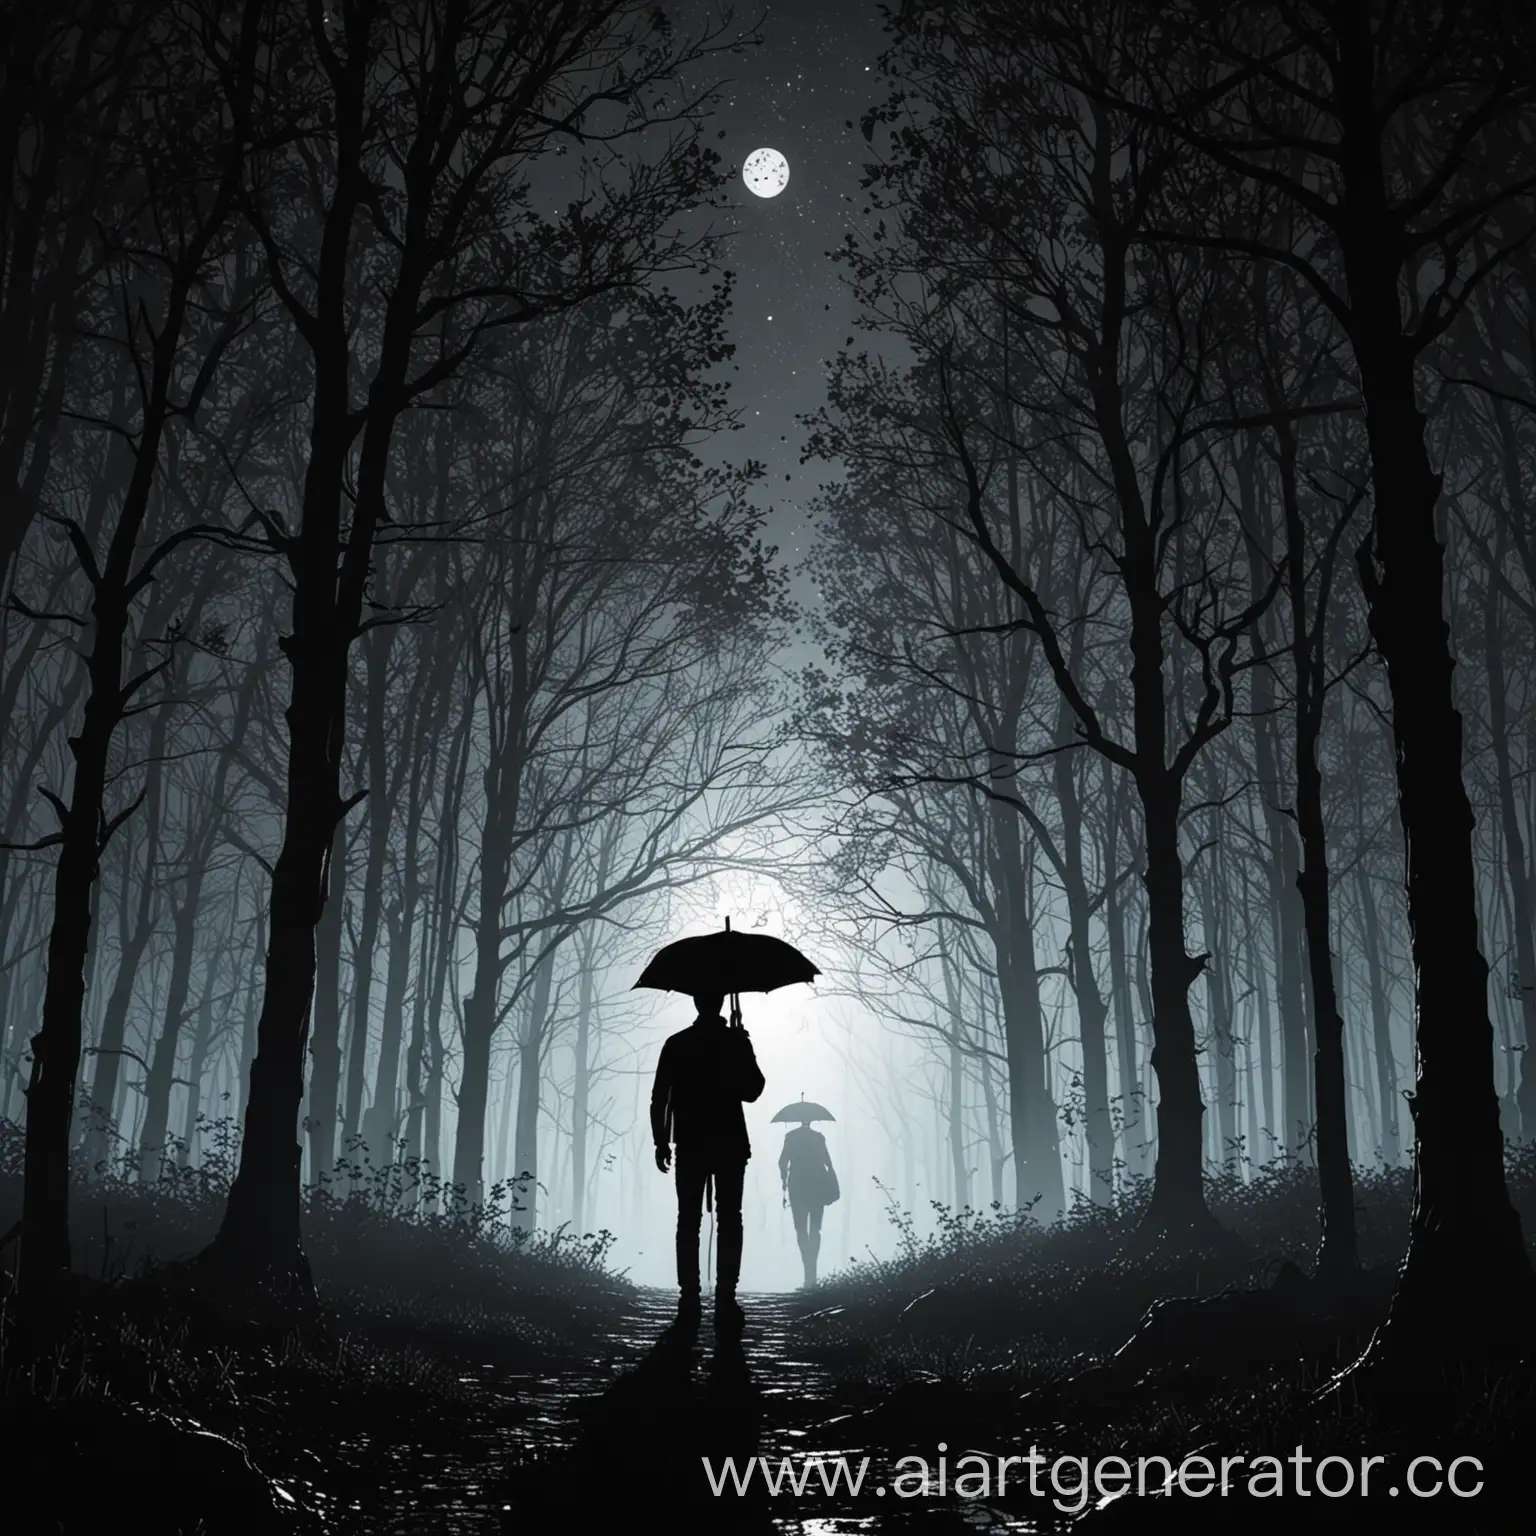 Lonely-Figure-with-Umbrella-in-Enchanted-Forest-at-Night-City-Lights-in-Distance-Comic-Style-Art